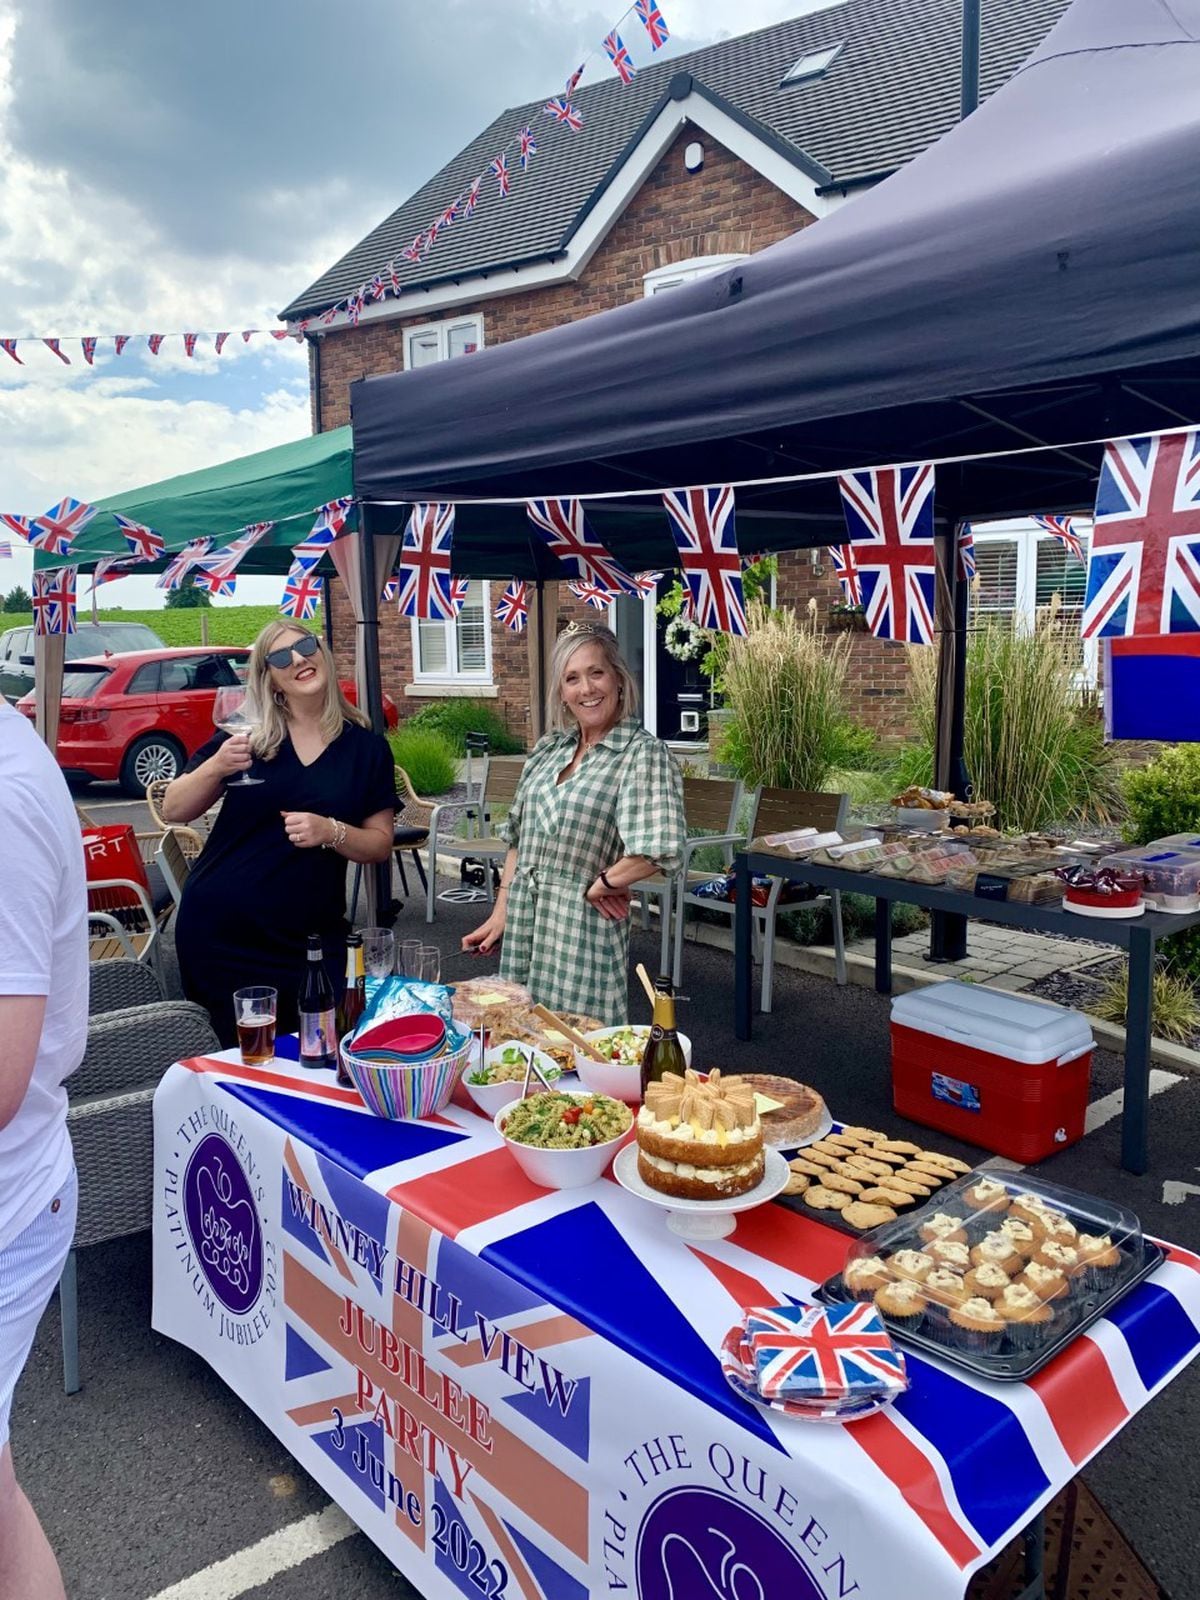 Residents of Winney Hill View, Shrewsbury celebrate the Queen's Platinum Jubilee